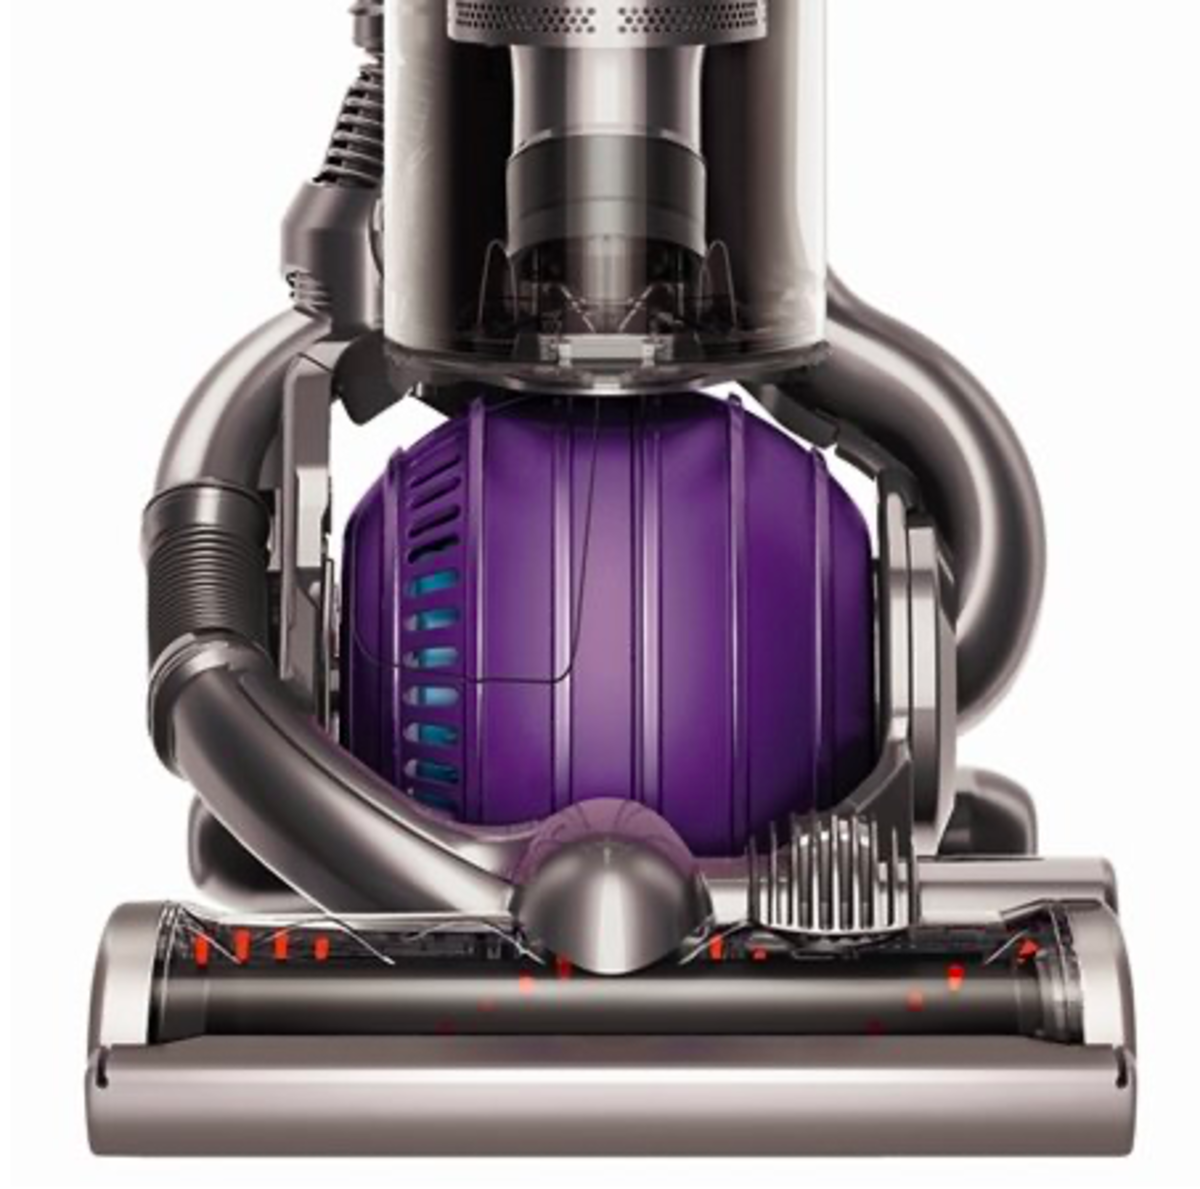 What to Check if Your Dyson DC24 Isn't Sucking Properly